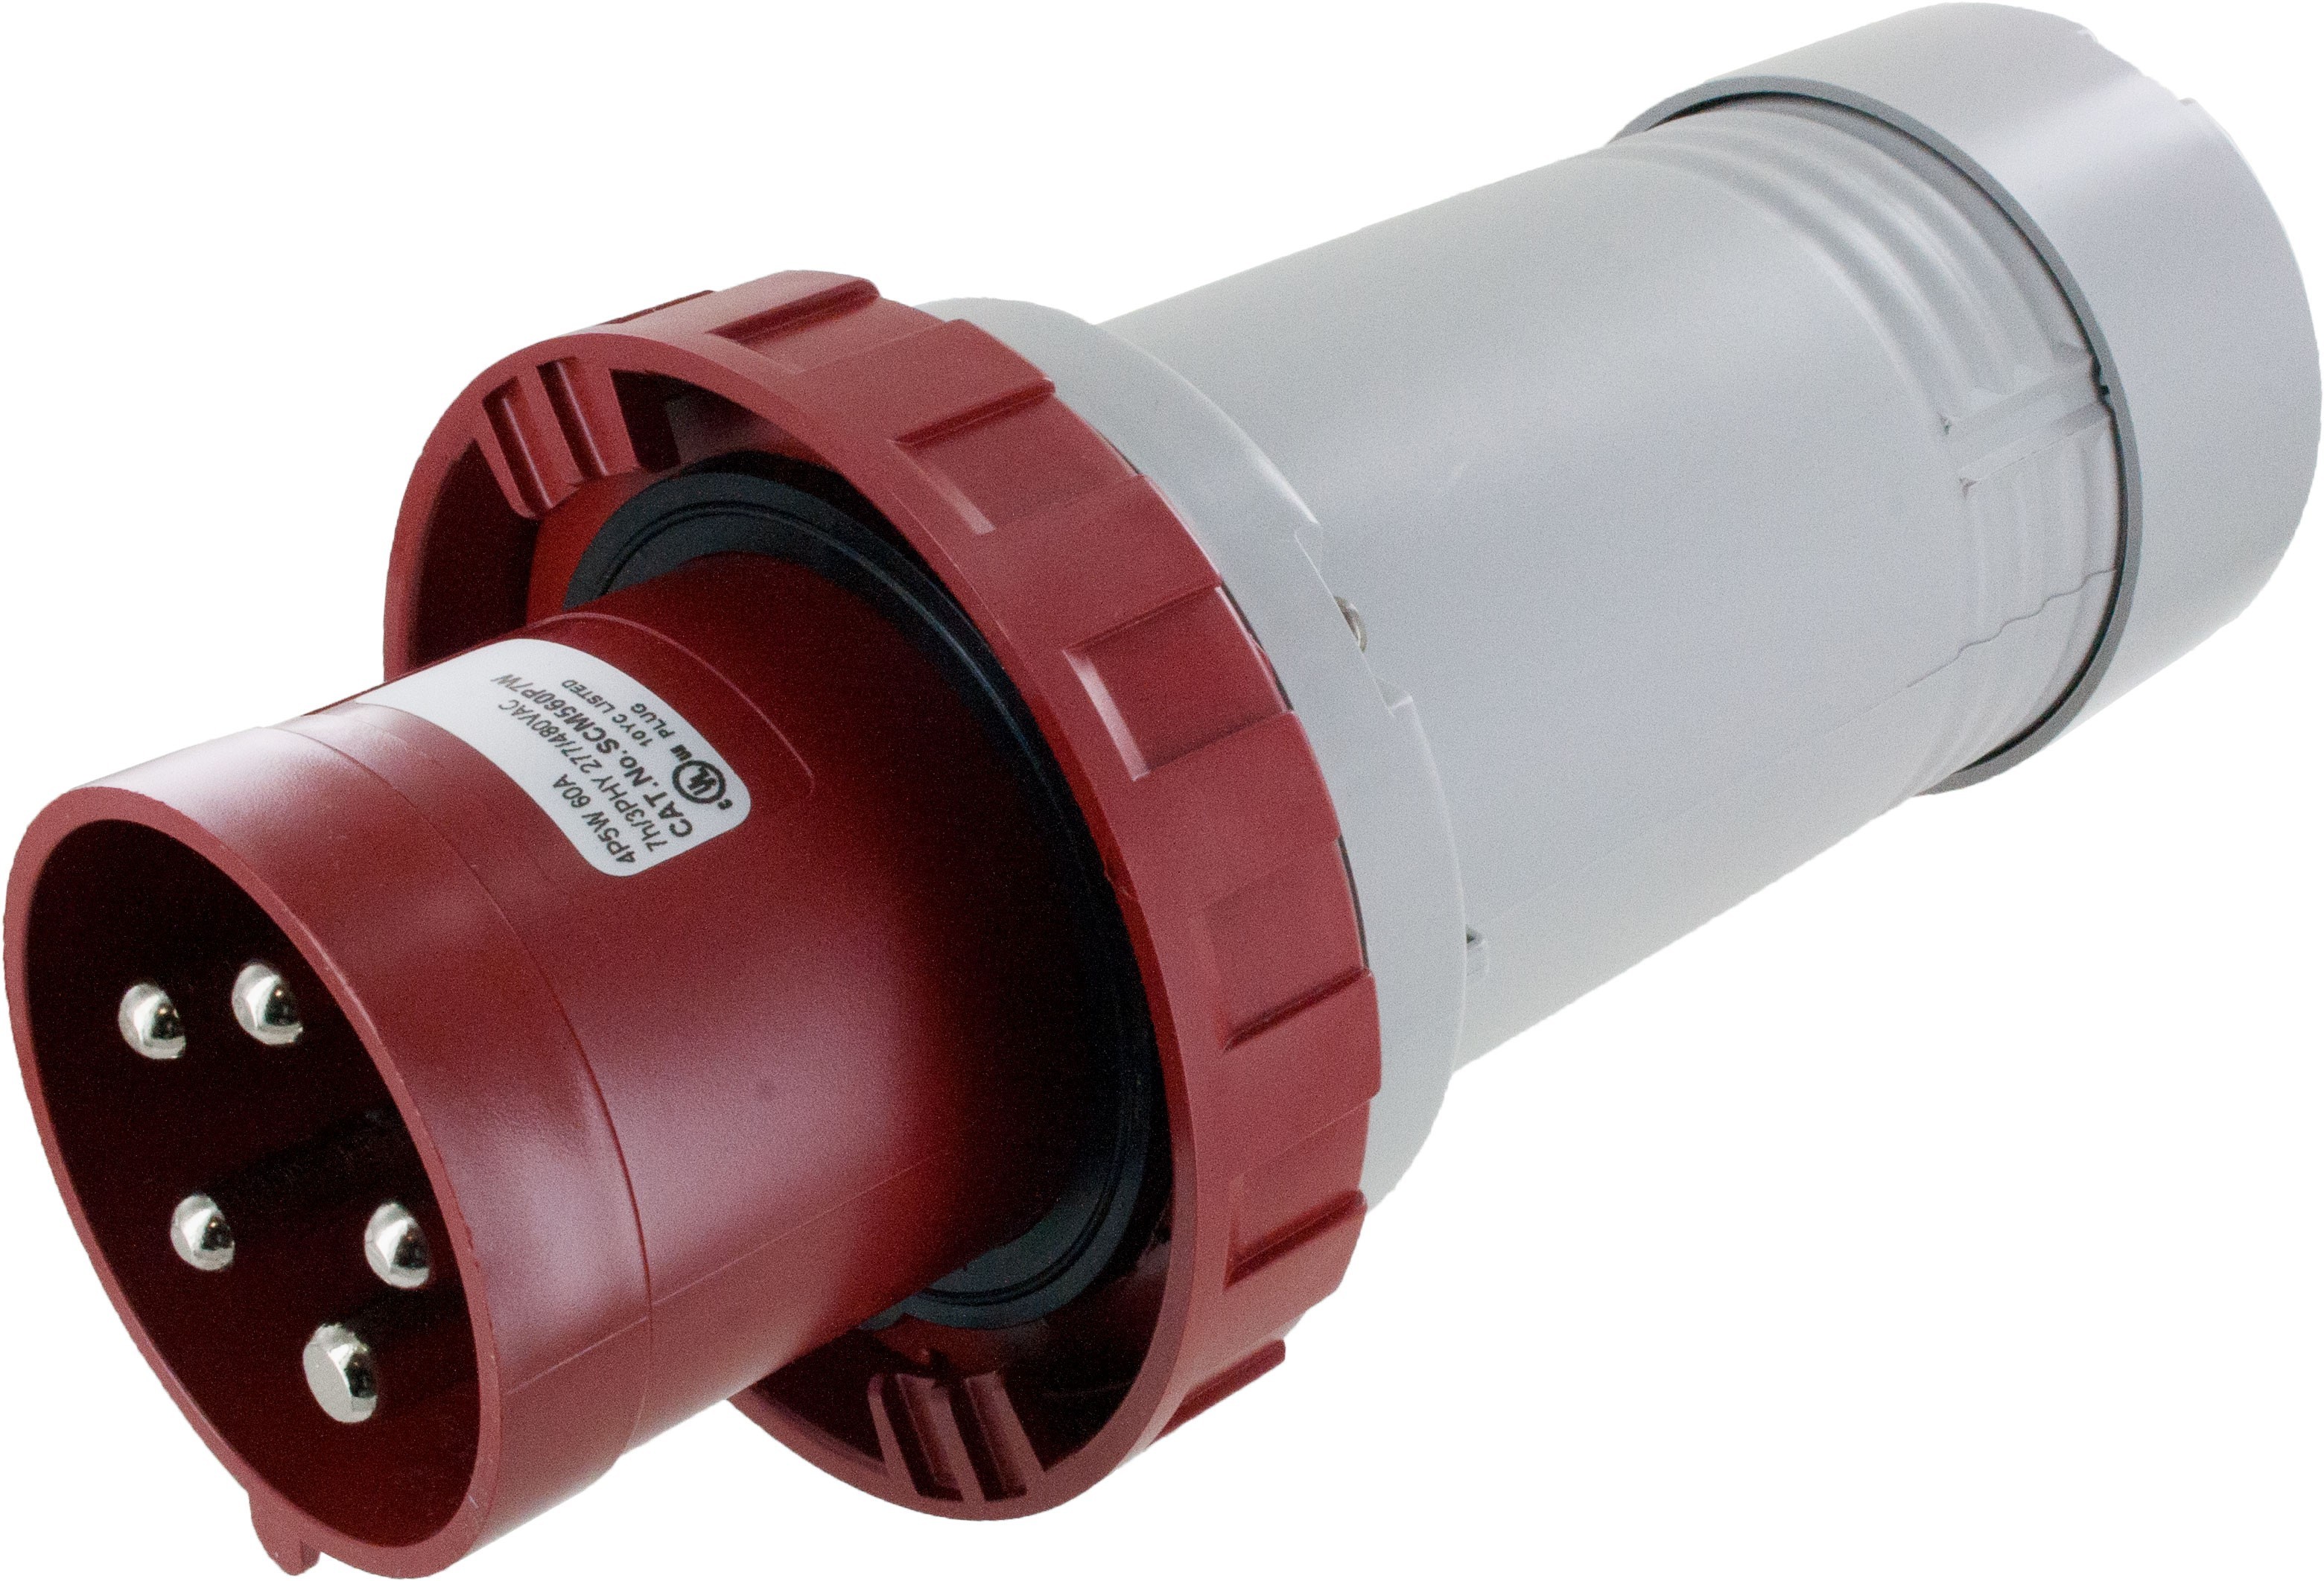 scm560p7w pin sleeve plug 60 and red